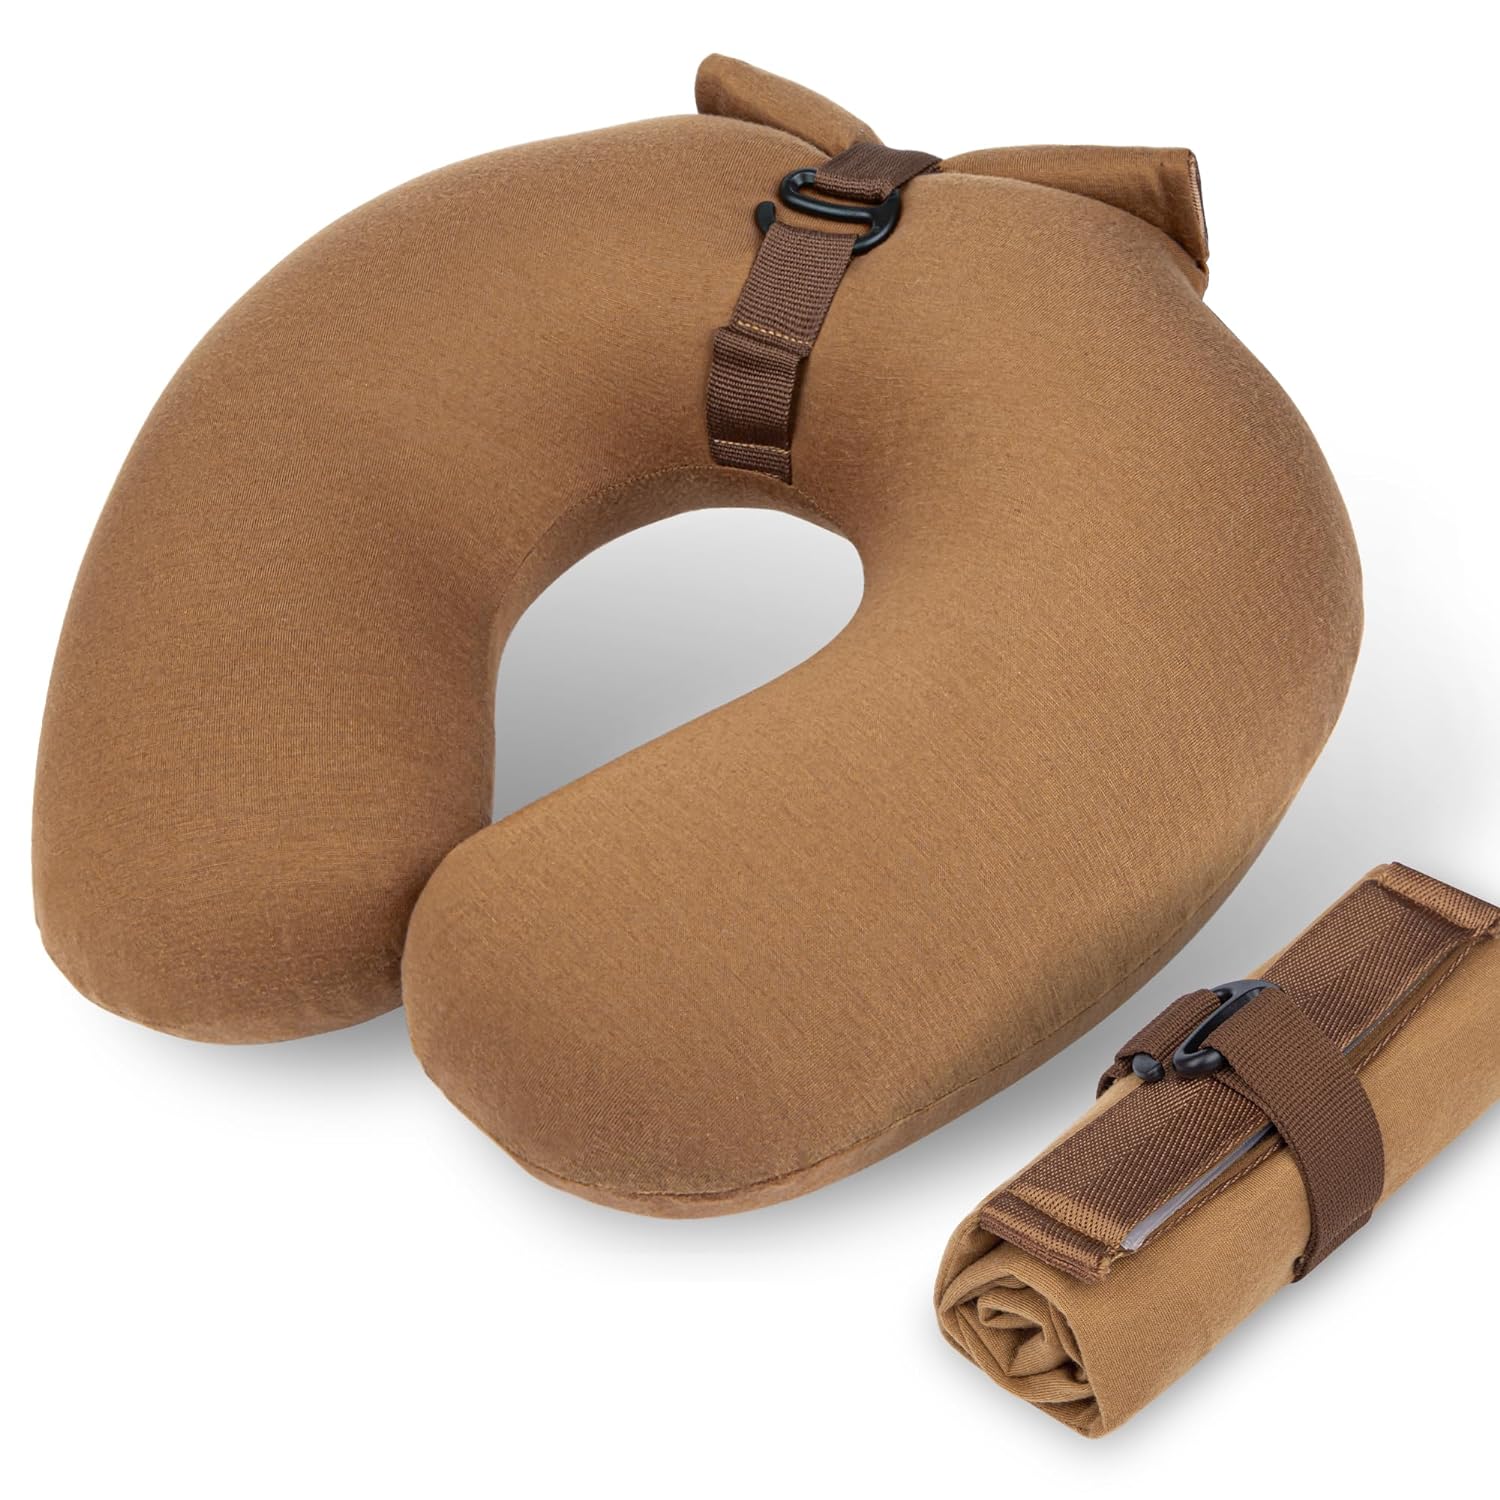 Supamommy Travel Pillow,Neck Pillow,Inflatable Travel Neck Pillow,Travel Pillows for Airplanes,Portable (Brown)